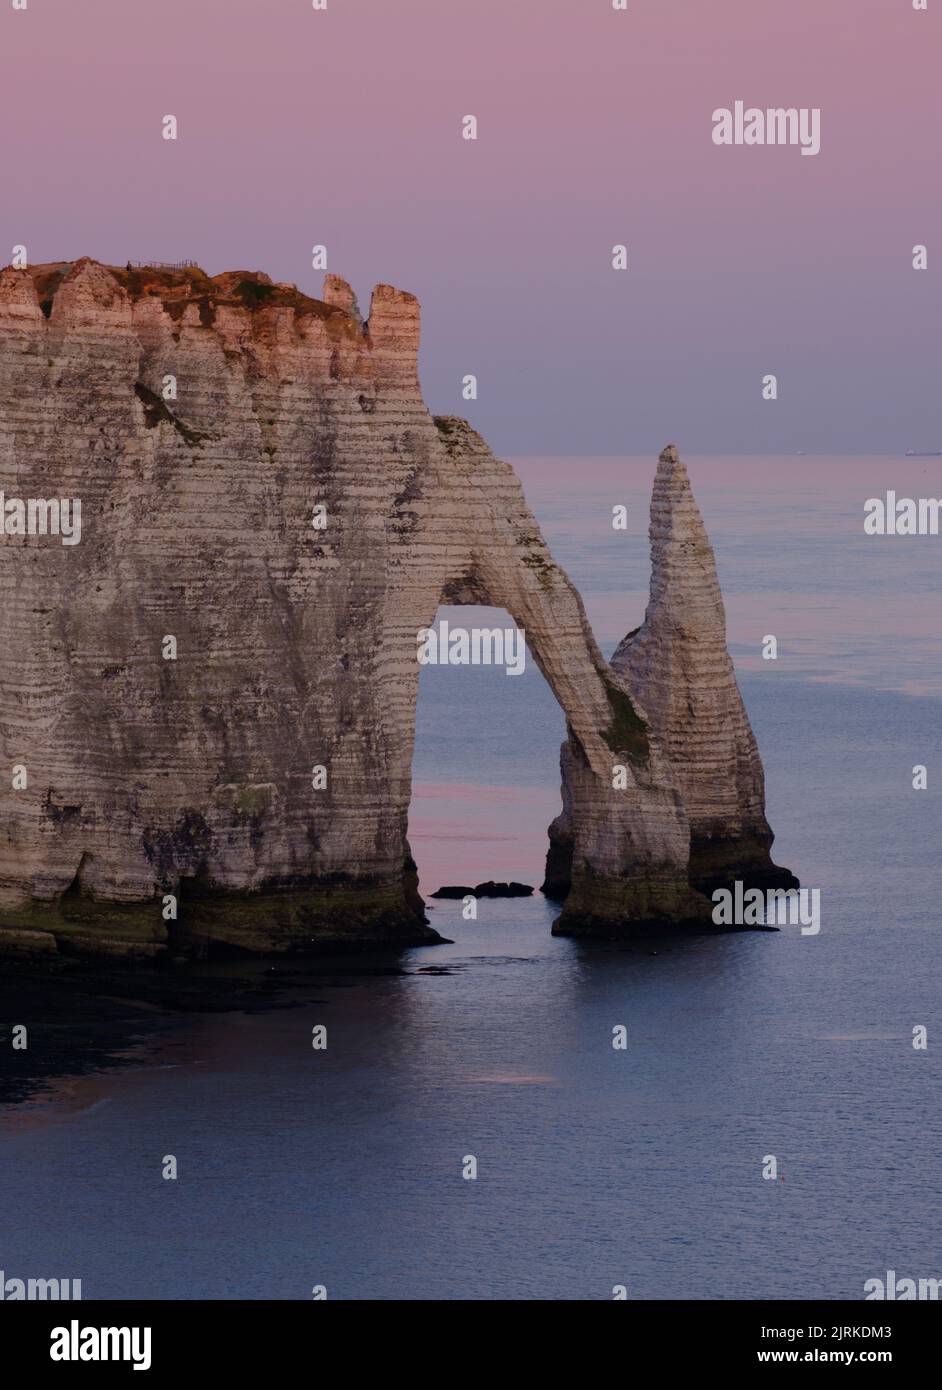 The Elephant's Trunk rock formation at Etretat, Normandy, French Channel Coast Stock Photo